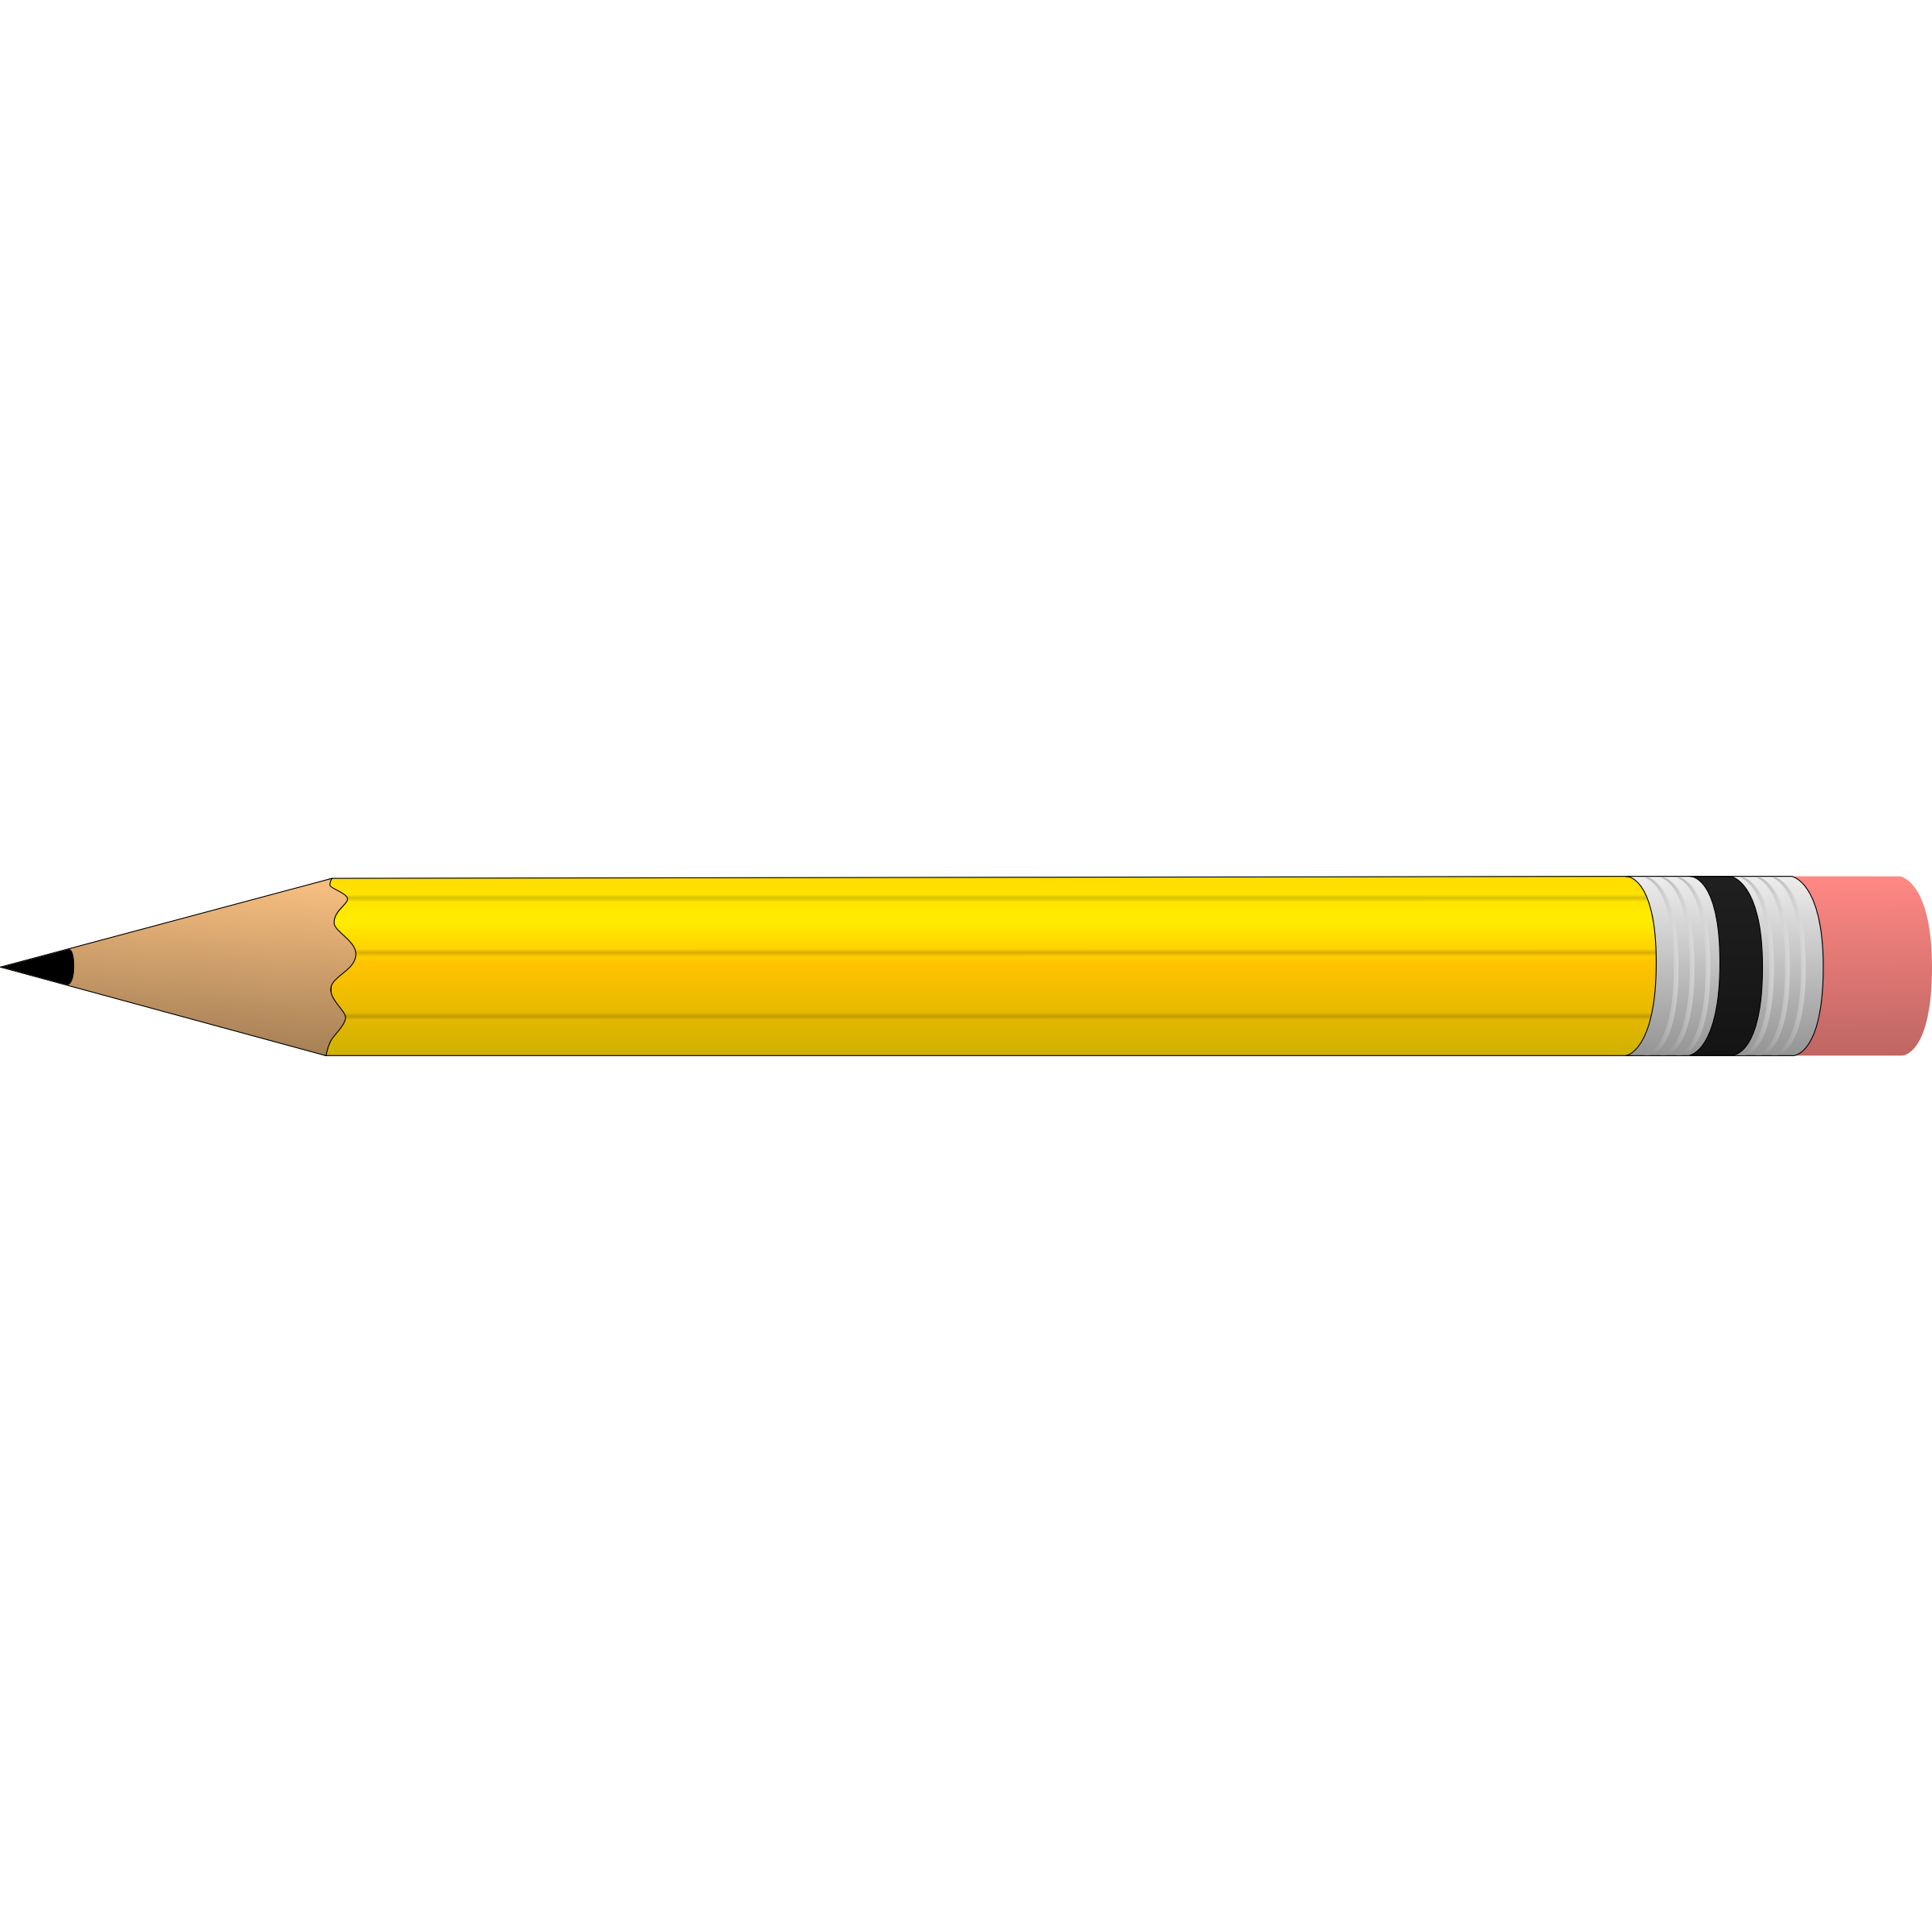 Dull Pencil PNG - 153757